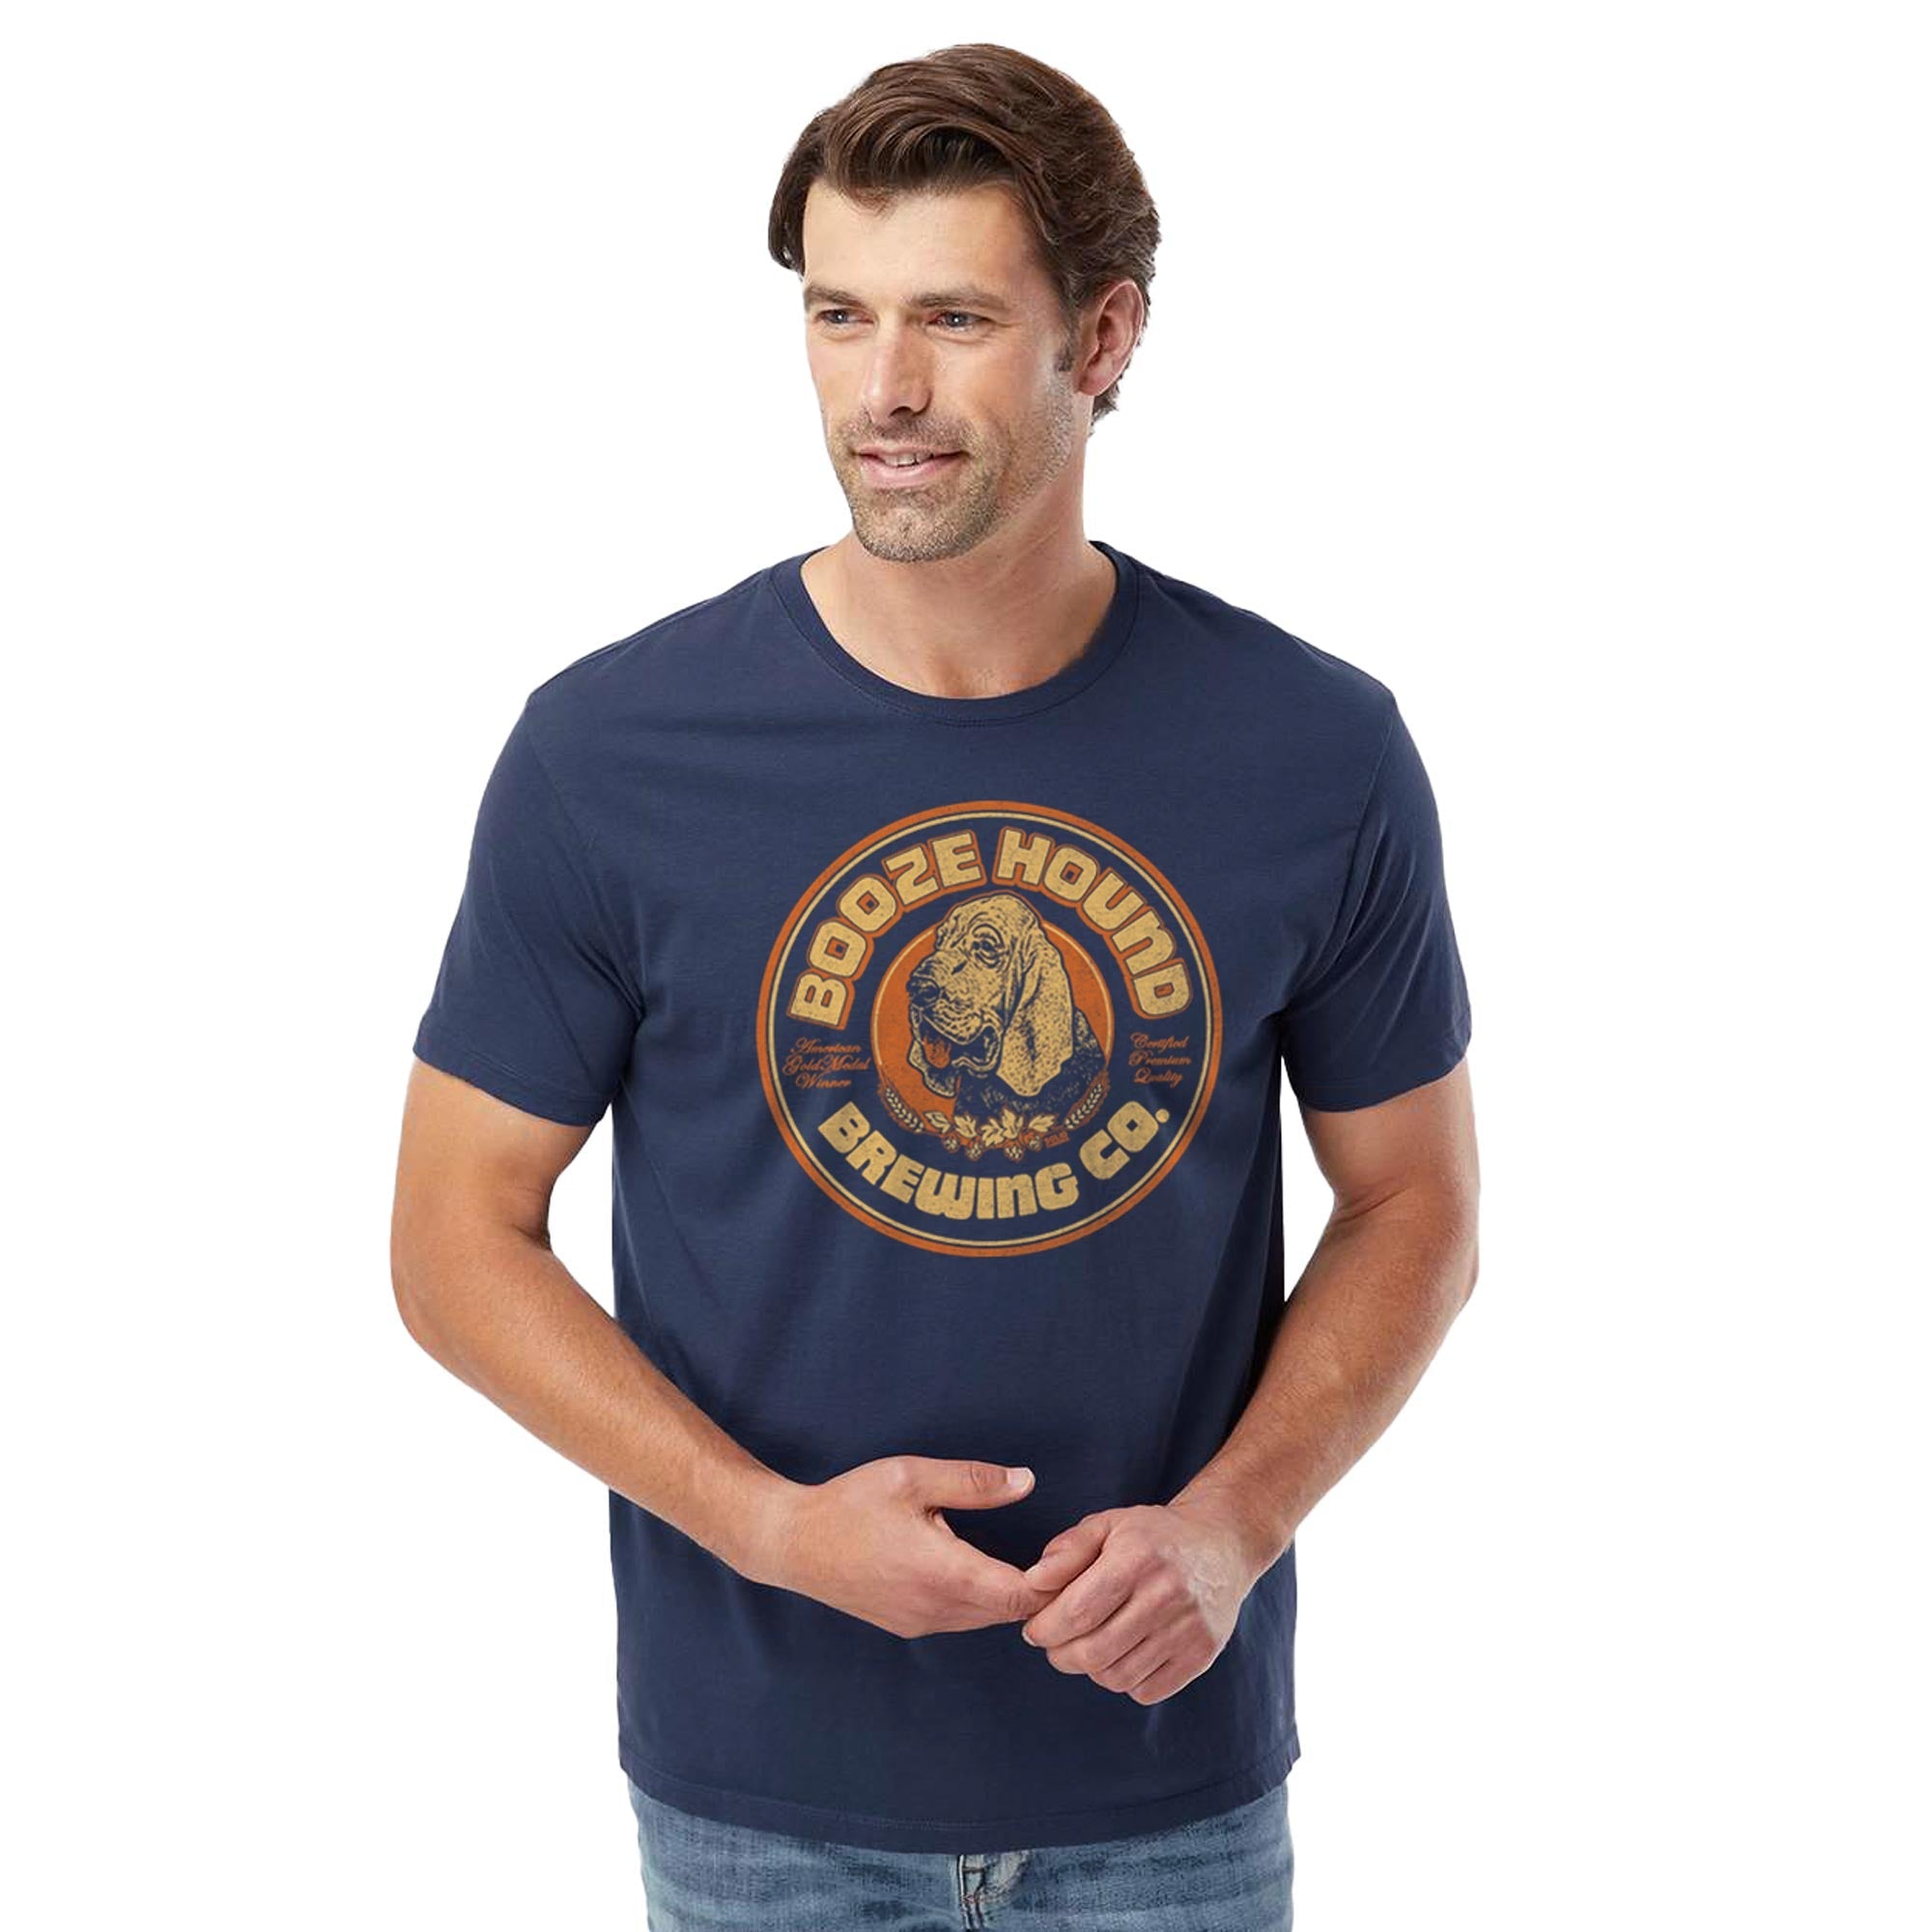 Boozehound Brewing Co. Vintage Organic Cotton T-shirt | Funny Drinking   Tee On Model | Solid Threads